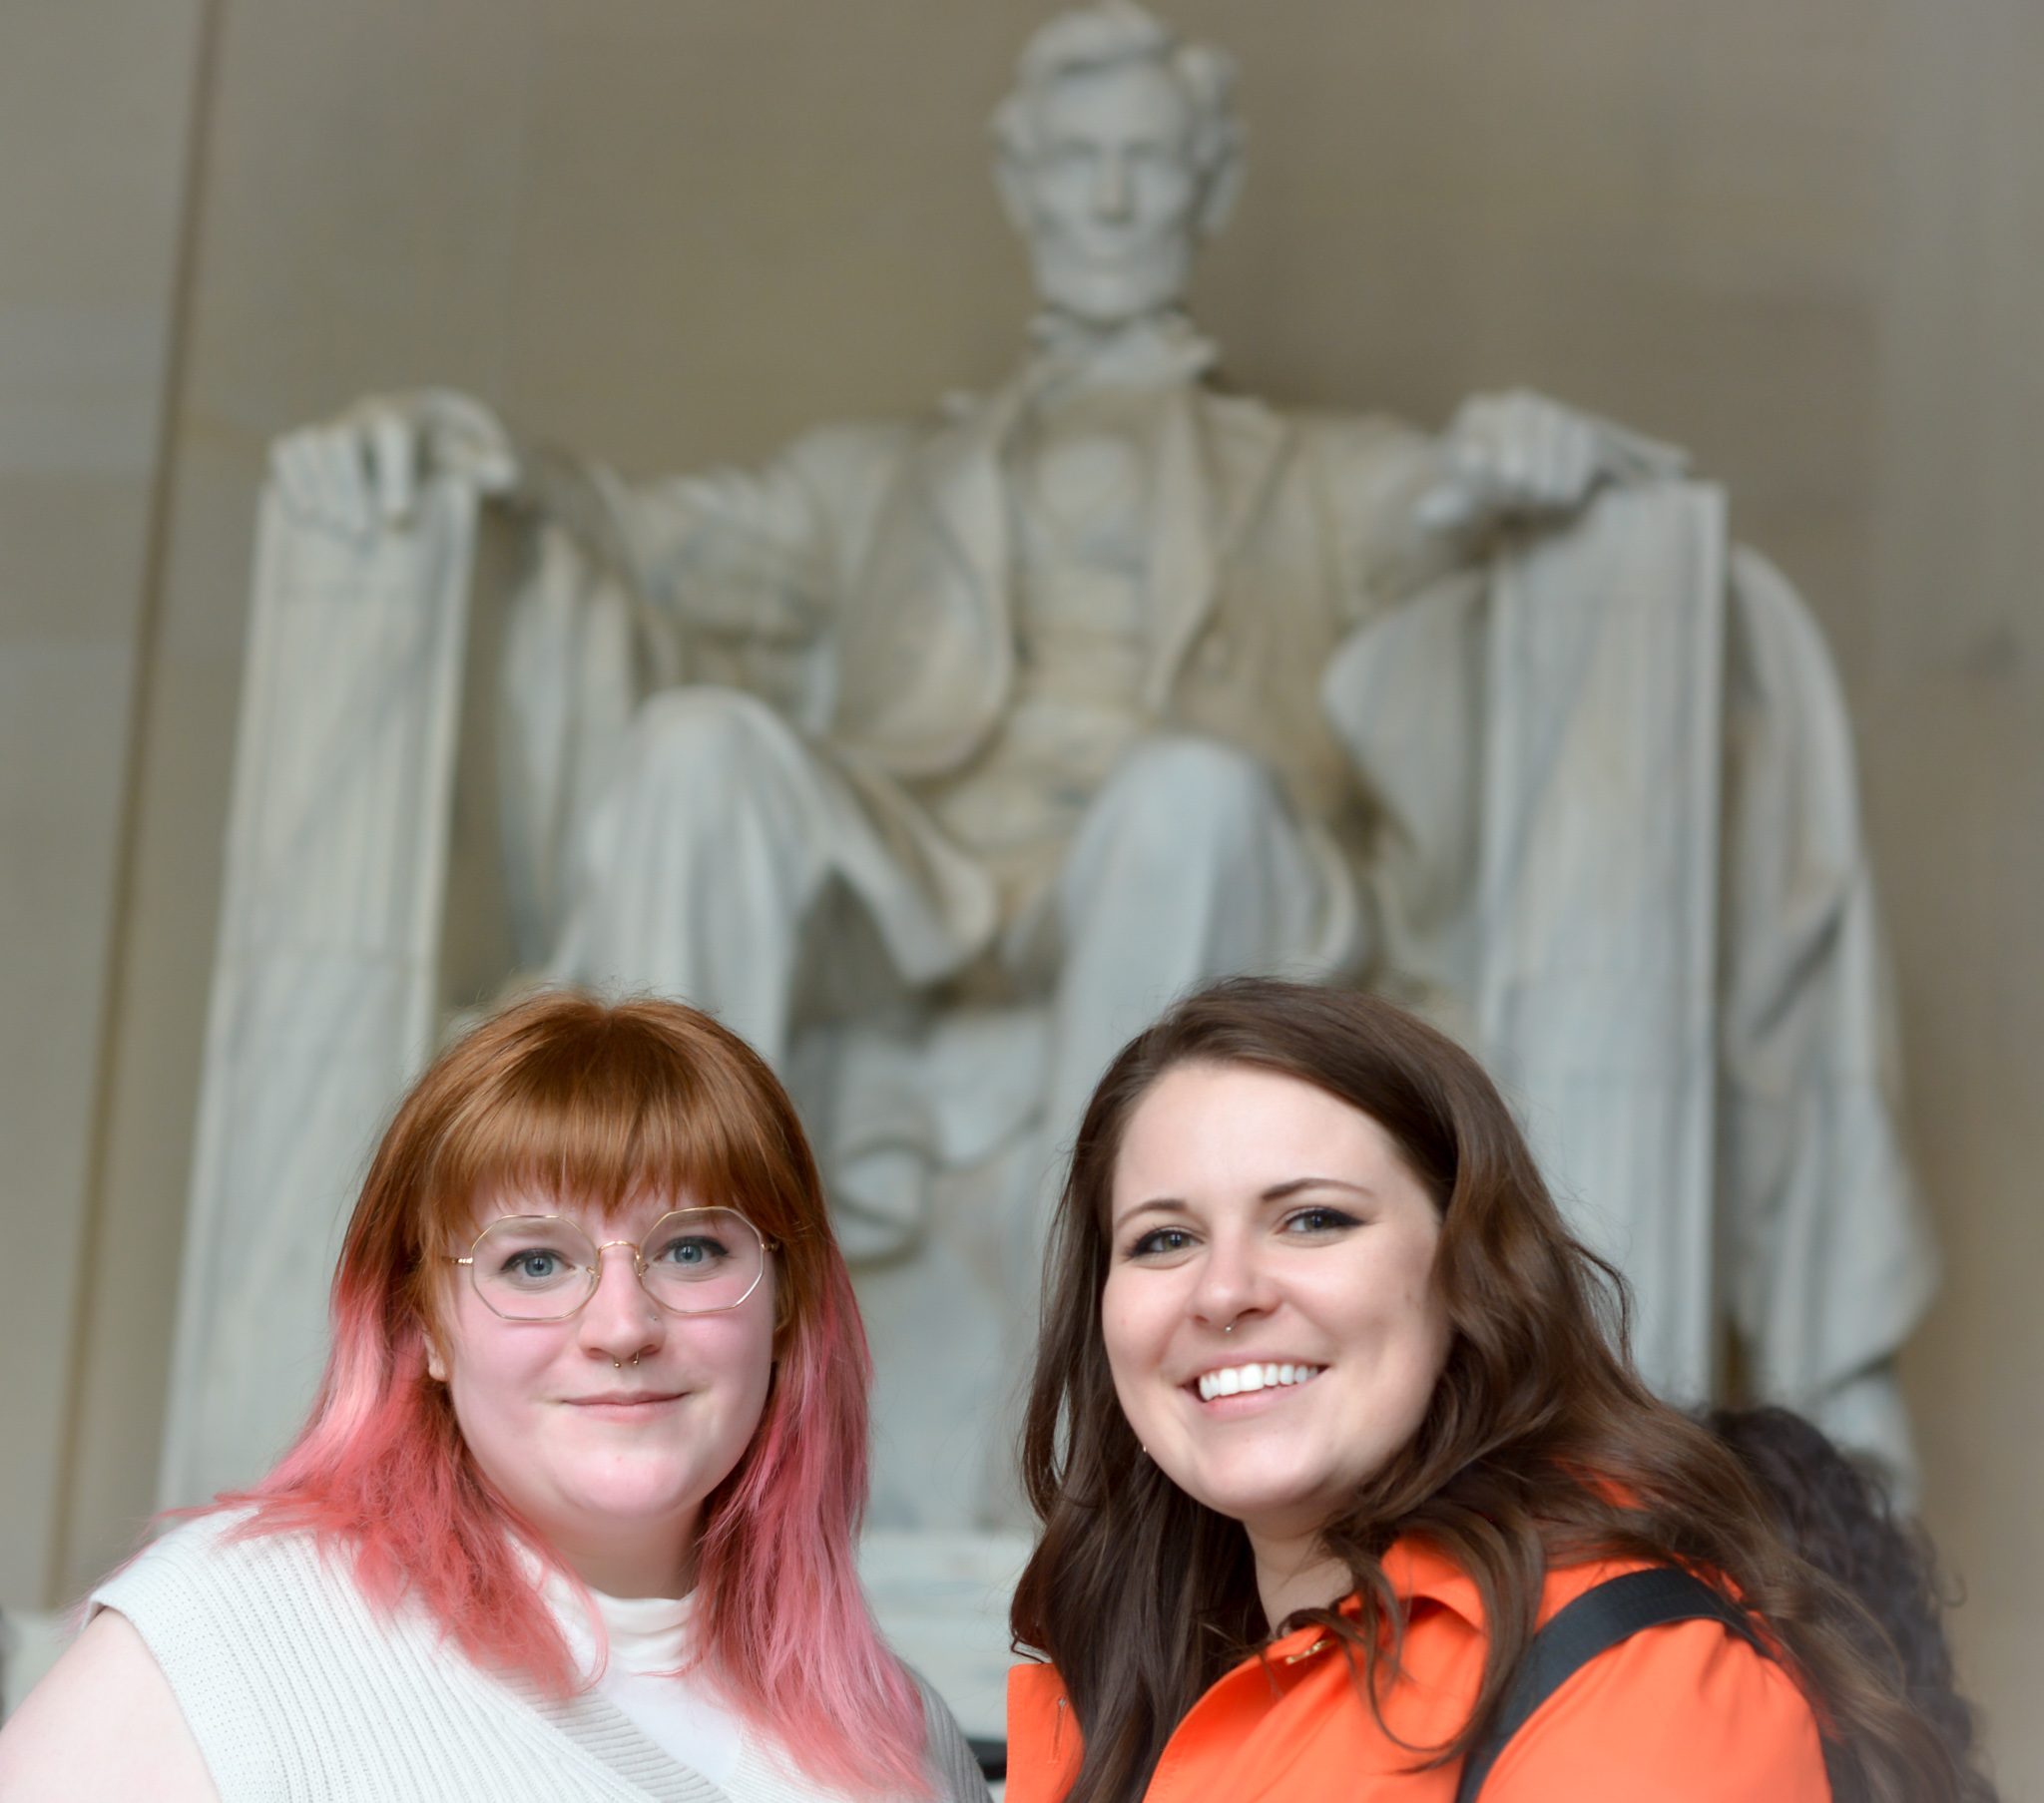 Henri and Ali Tomashek smile at the camera in front of the Lincoln Memorial in Washington D.C.